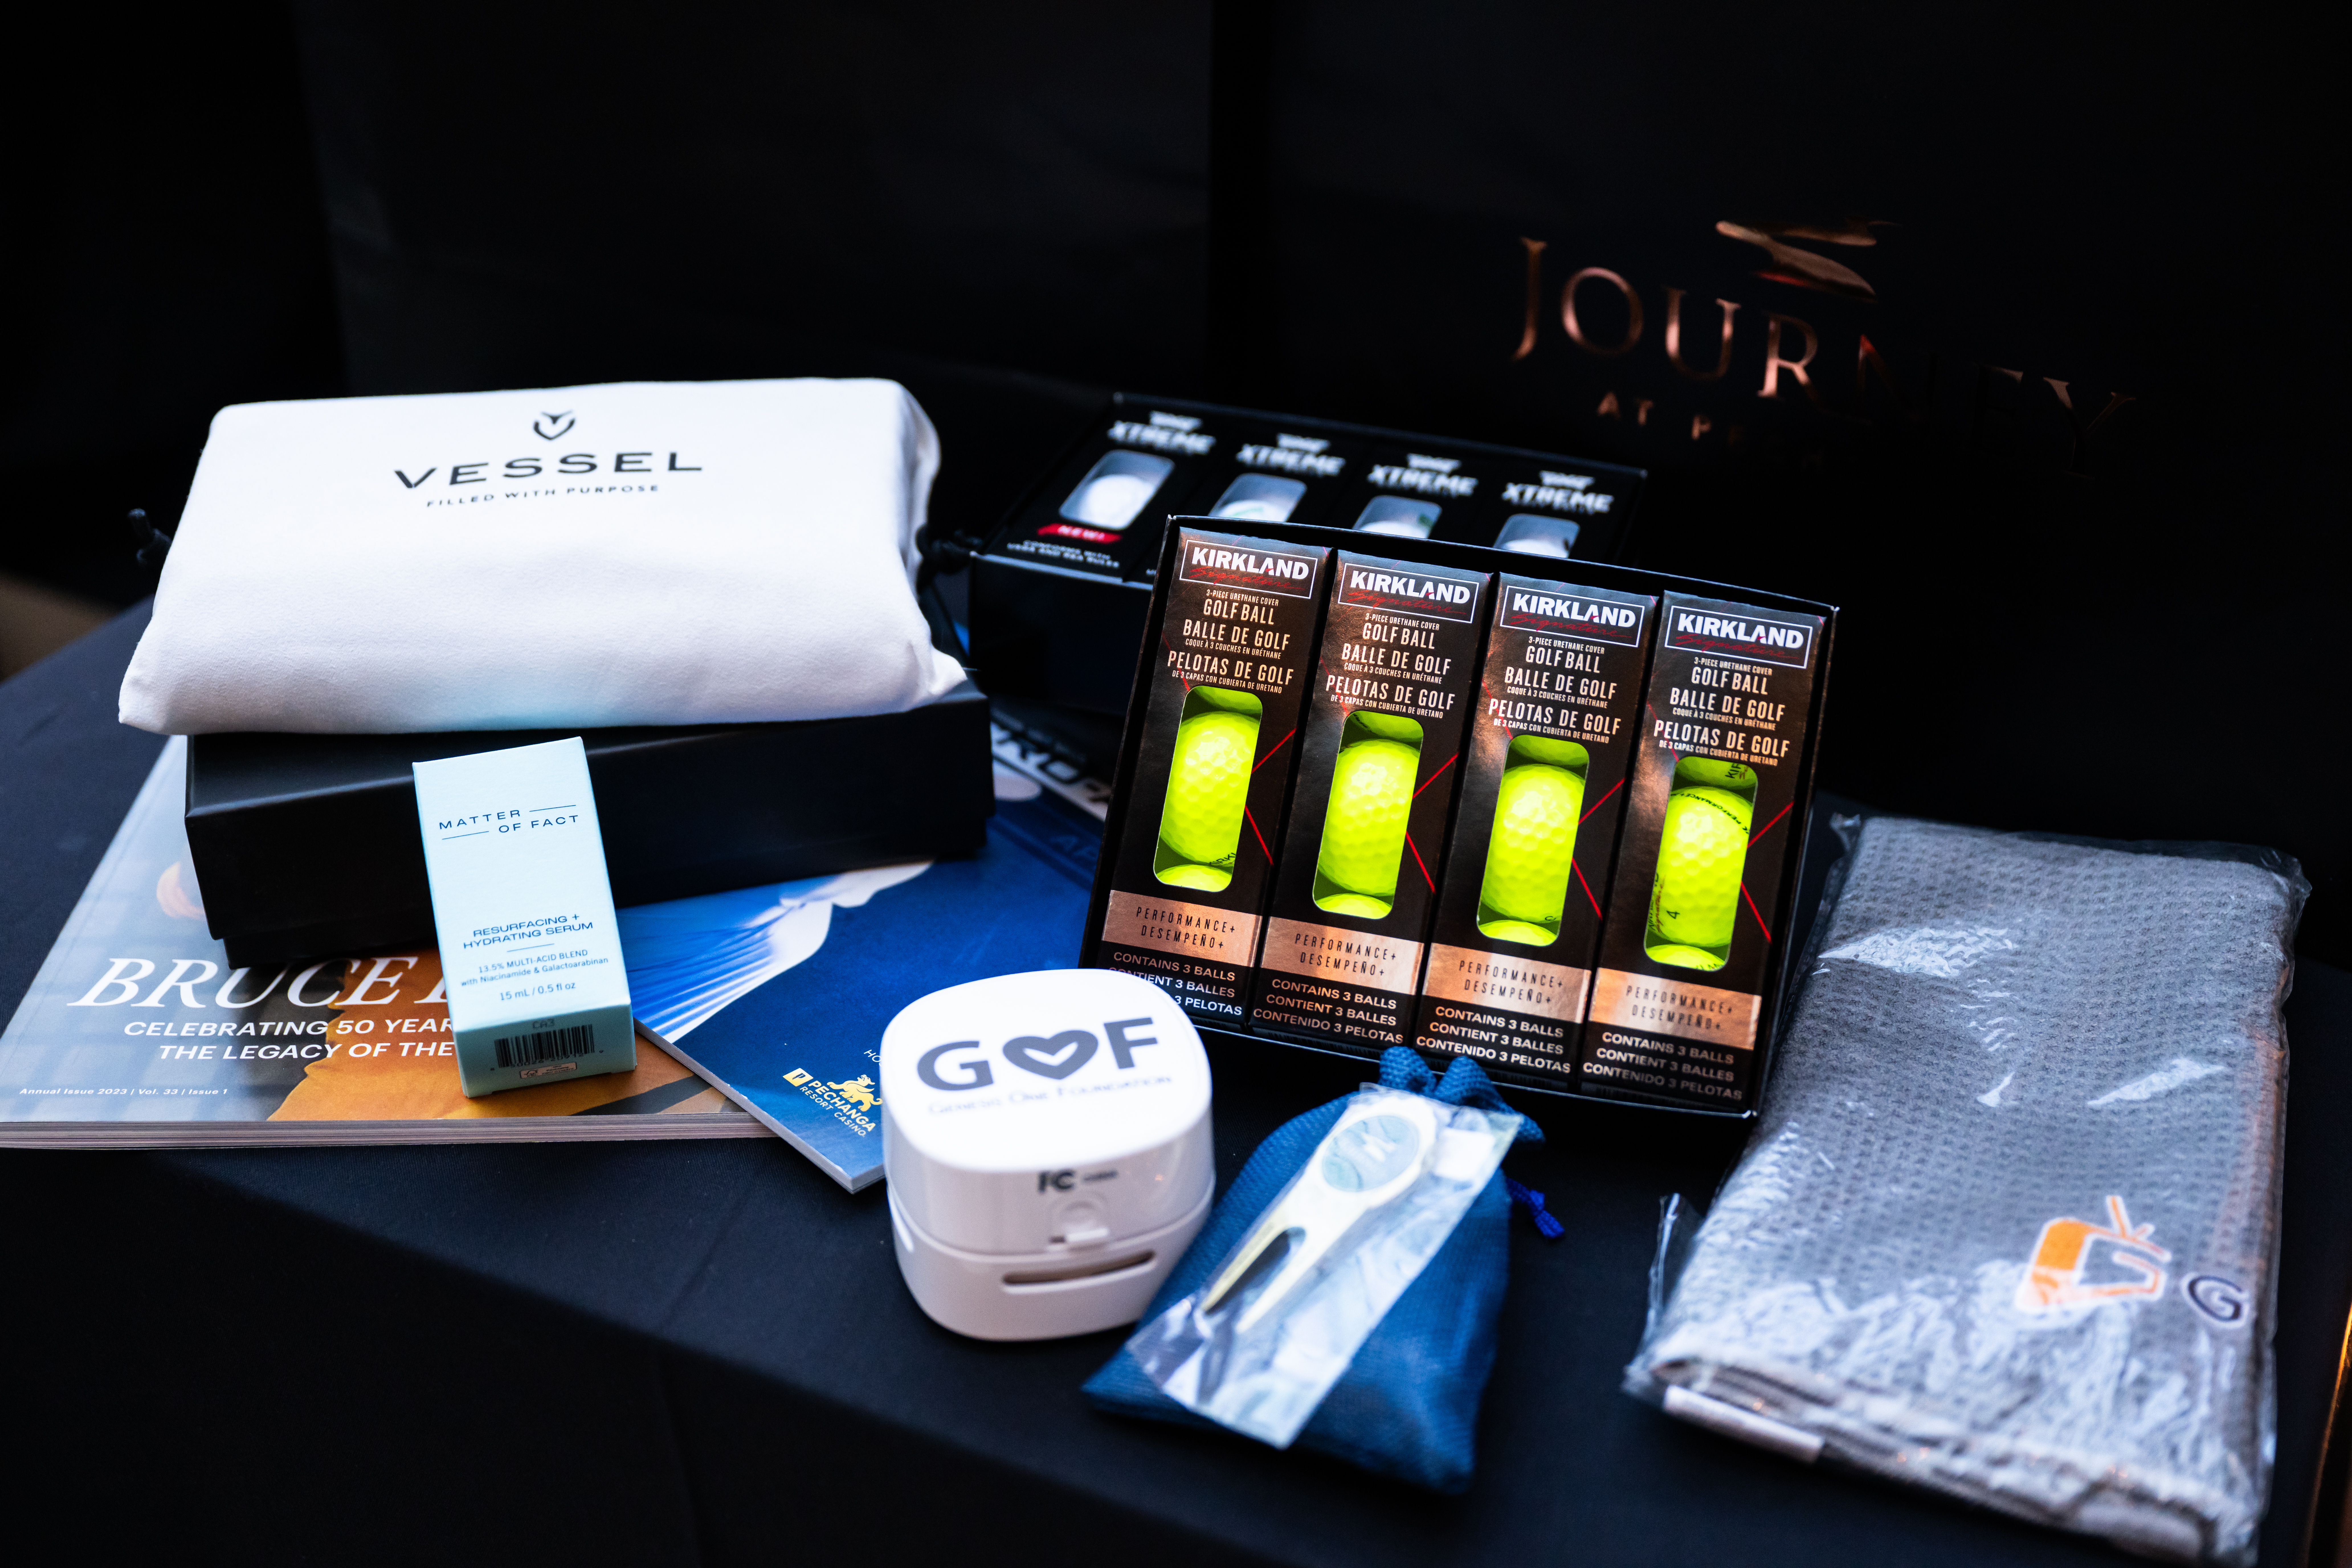 Player gift bags stuffed with custom CM tees, Pechanga ball markers and divot fixers, GoldenTV-sponsored Vessel towels, SM Global-sponsored PXG and Kirkland golf balls, Matter of Fact serums, Genesis One Foundation desk vacuums and Pair of Thieves socks.